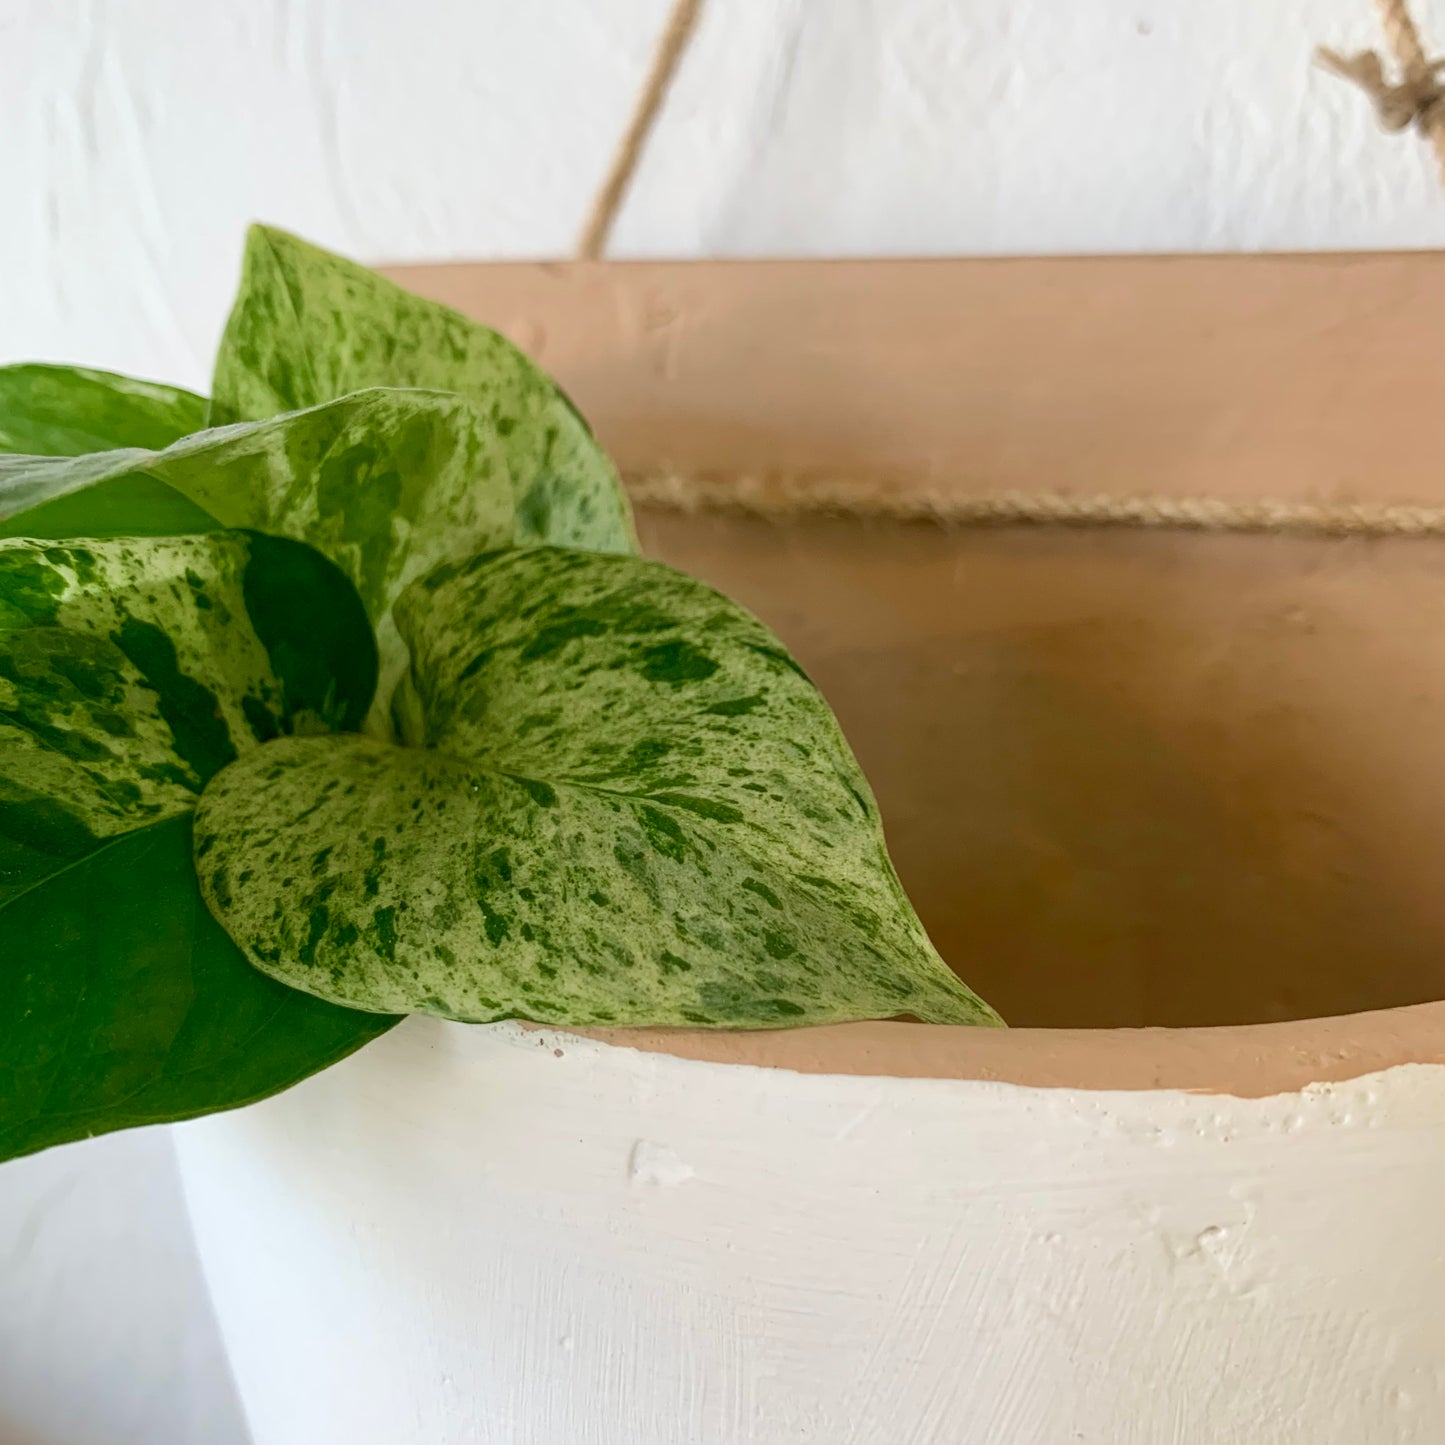 Clay Wall Hanging Planter